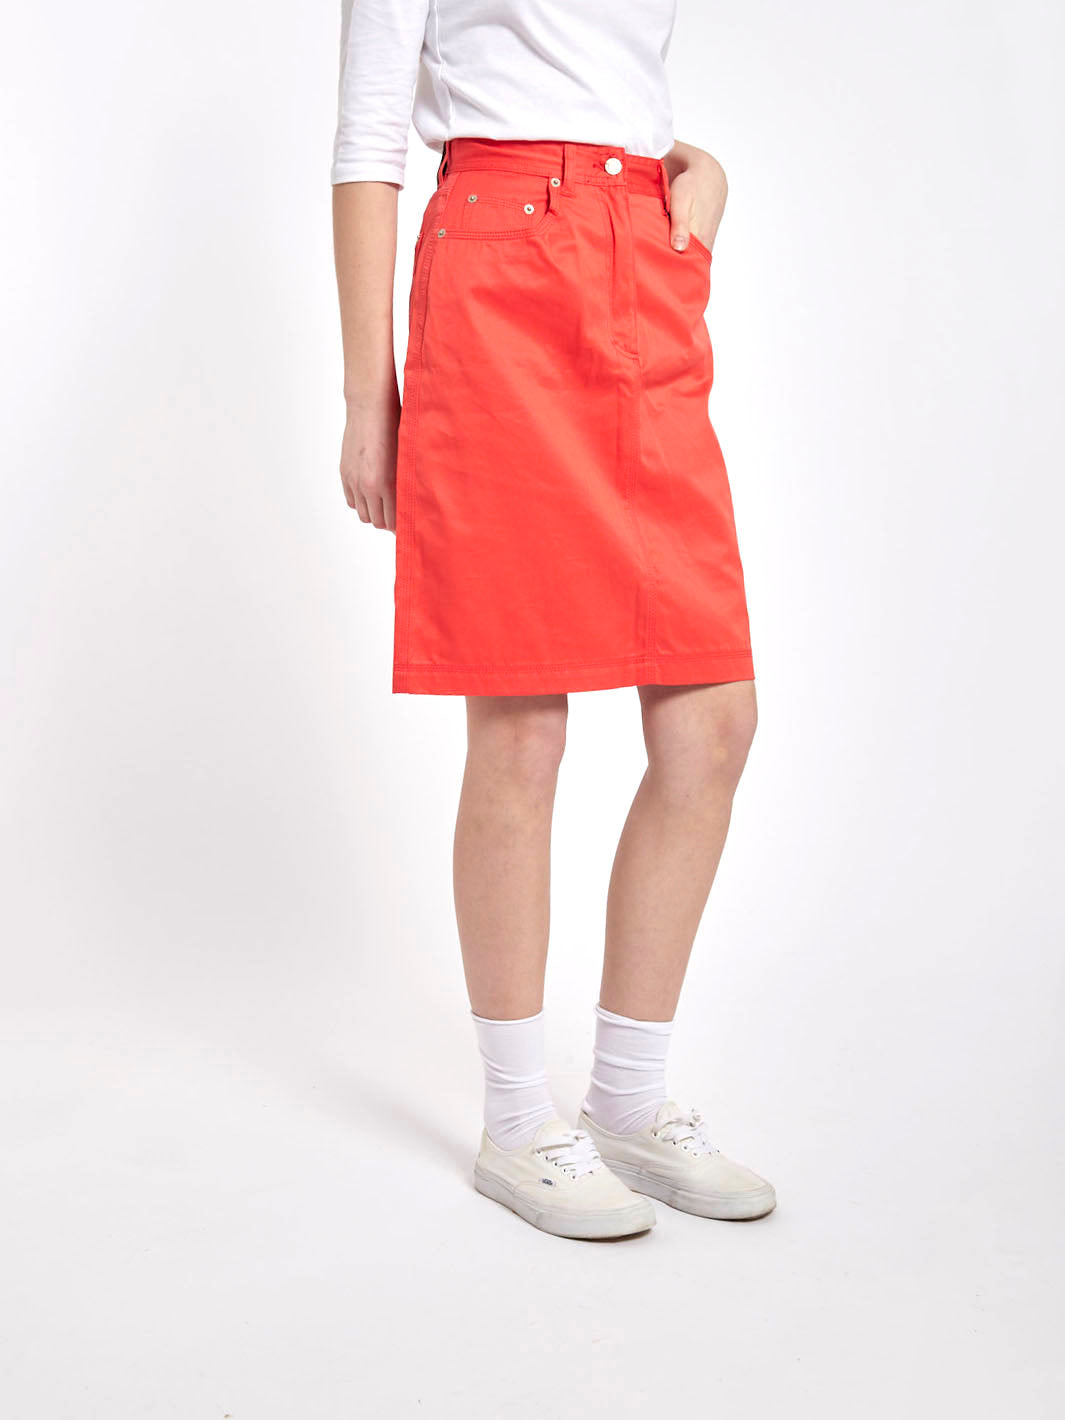 1990s Gucci coral color midi skirt with monogram embroidery